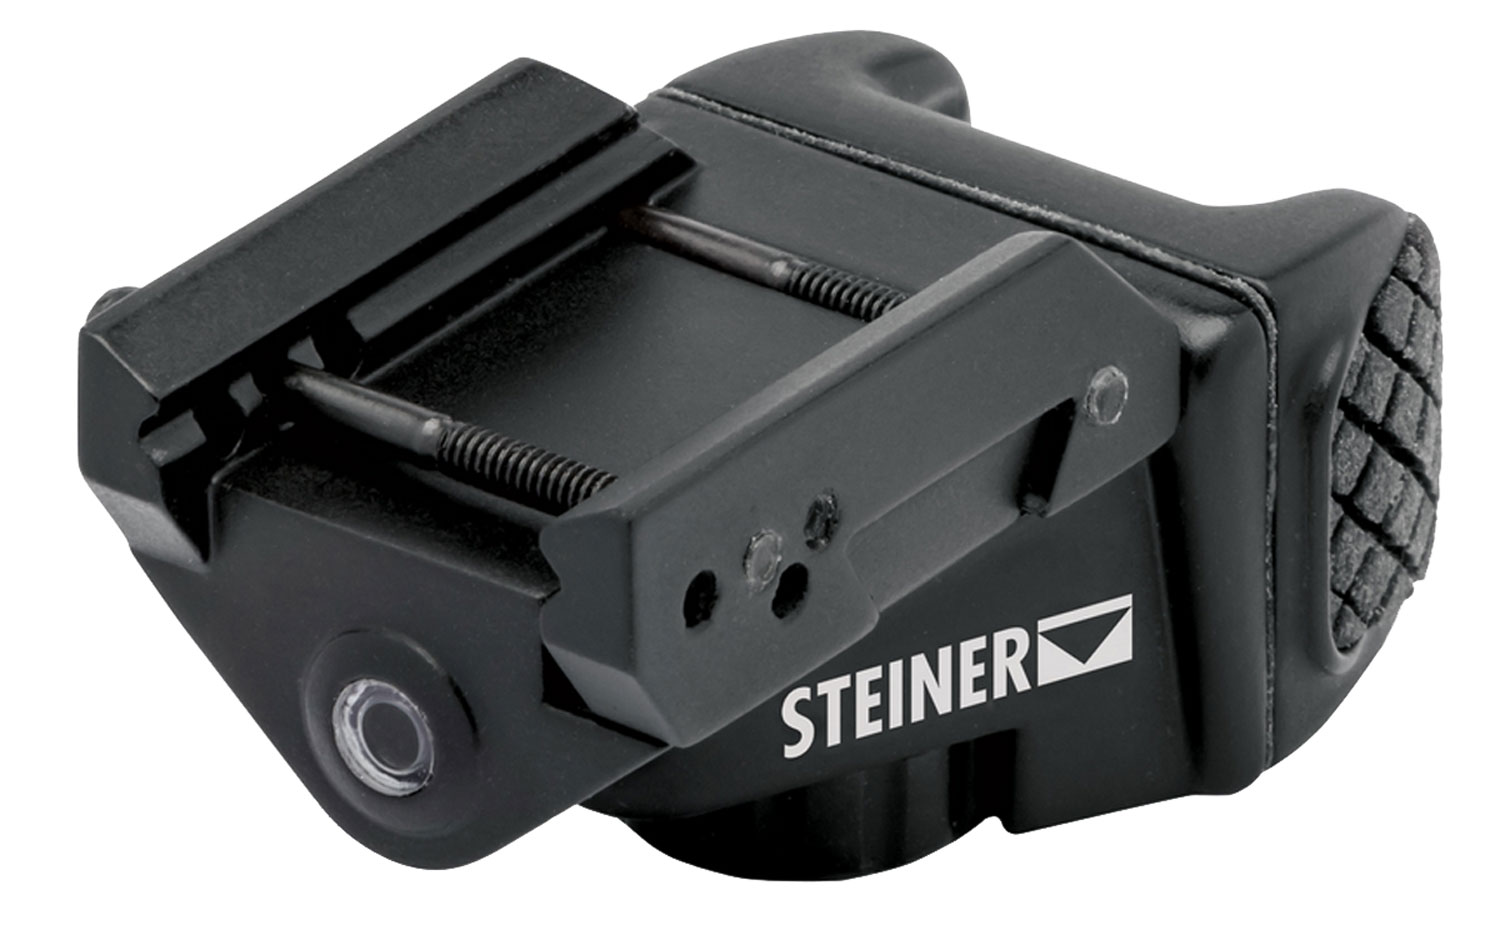 Steiner 7003 TOR Mini  5mW Green Laser with 520nM Wavelength & Black Finish for Picatinny or Weaver Rail Equipped Pistol